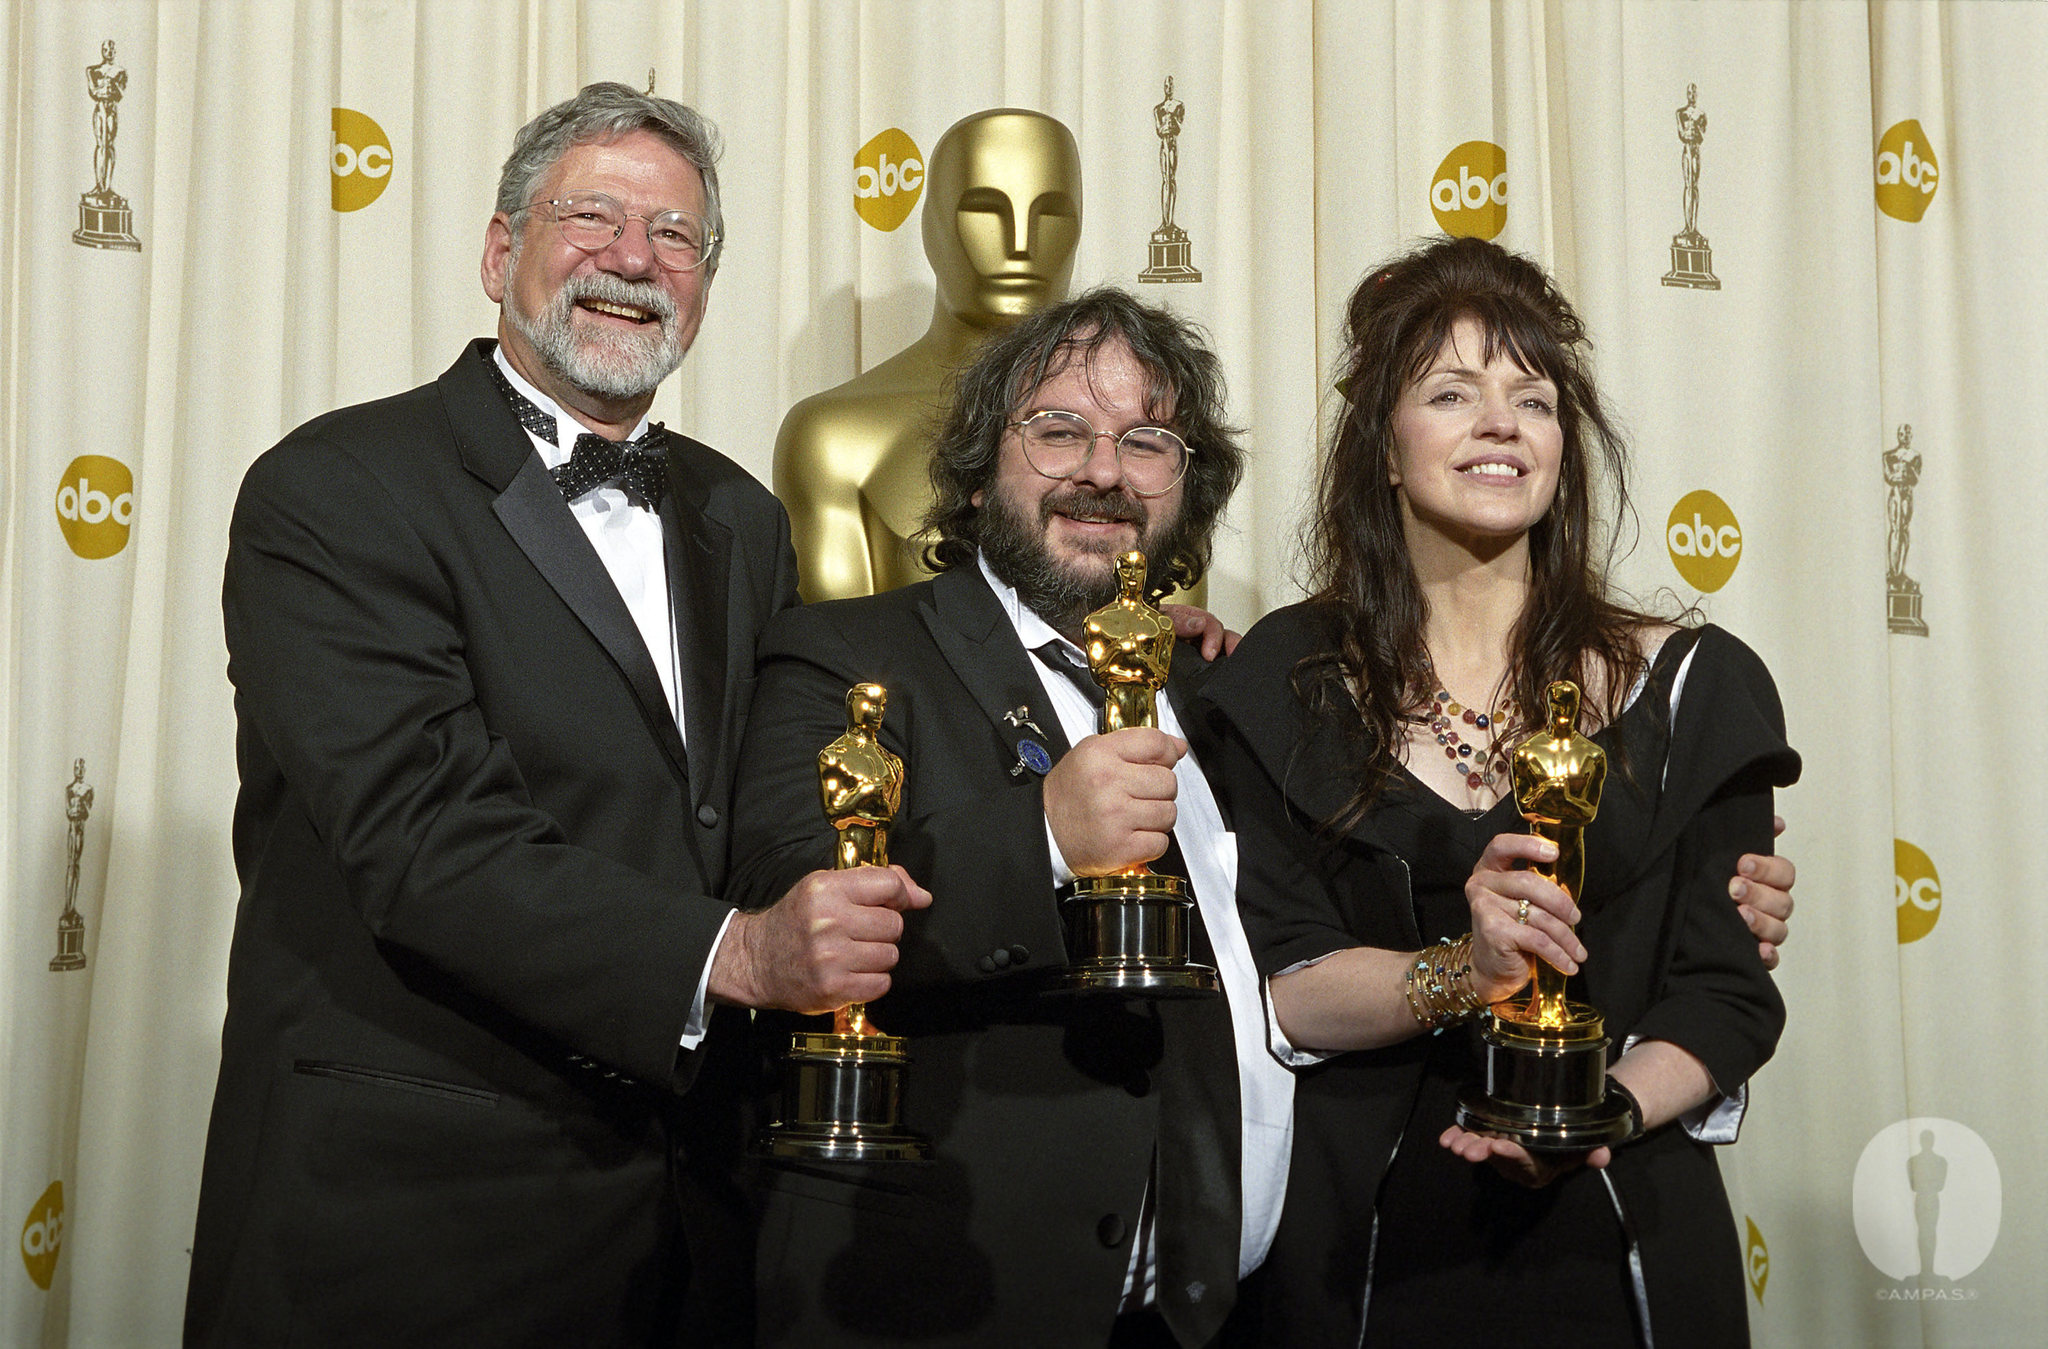 Peter Jackson, Barrie M. Osborne and Fran Walsh at event of The 76th Annual Academy Awards (2004)